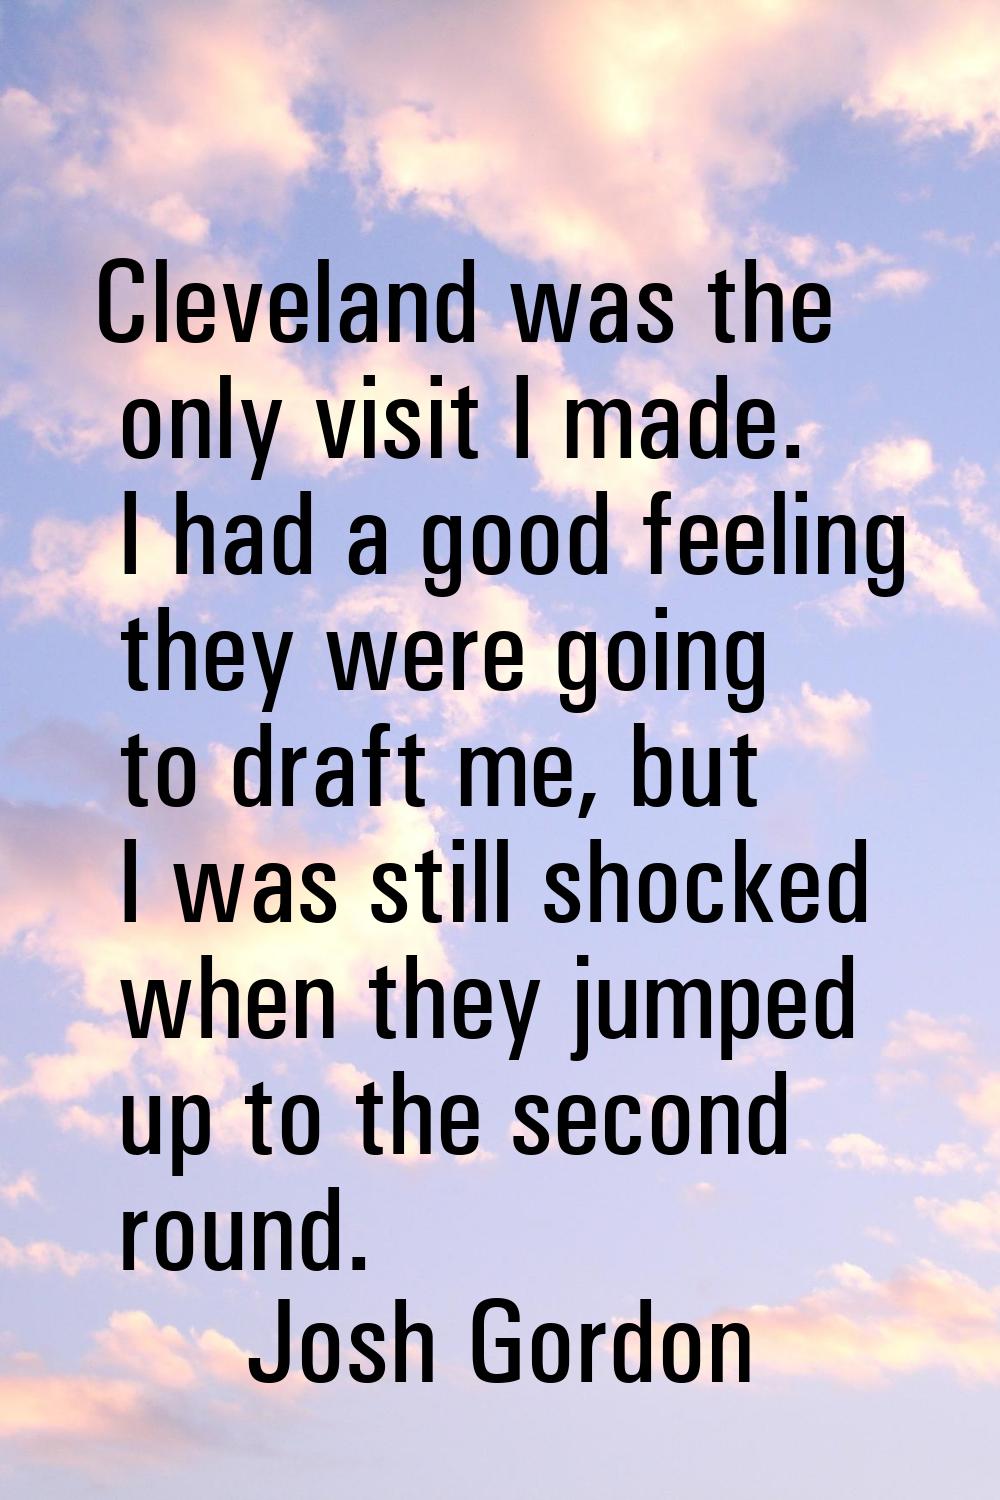 Cleveland was the only visit I made. I had a good feeling they were going to draft me, but I was st